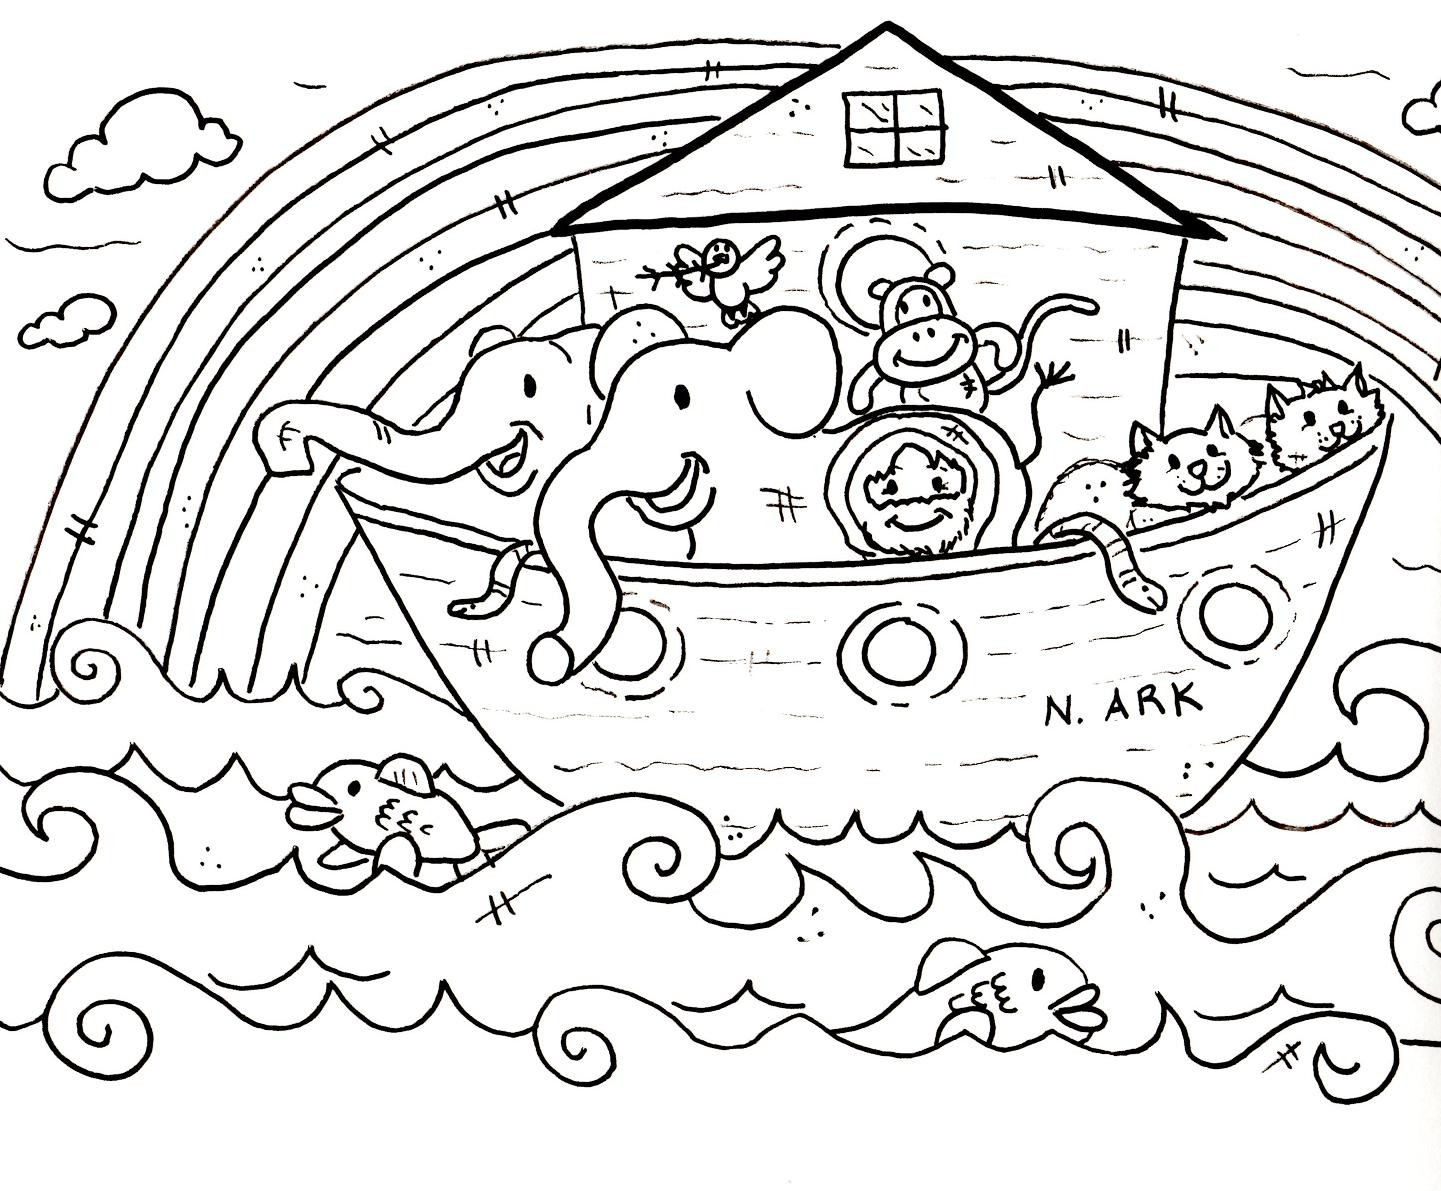 Coloring Pages Bible Stories Preschoolers | Freshcols - Free Printable Bible Story Coloring Pages